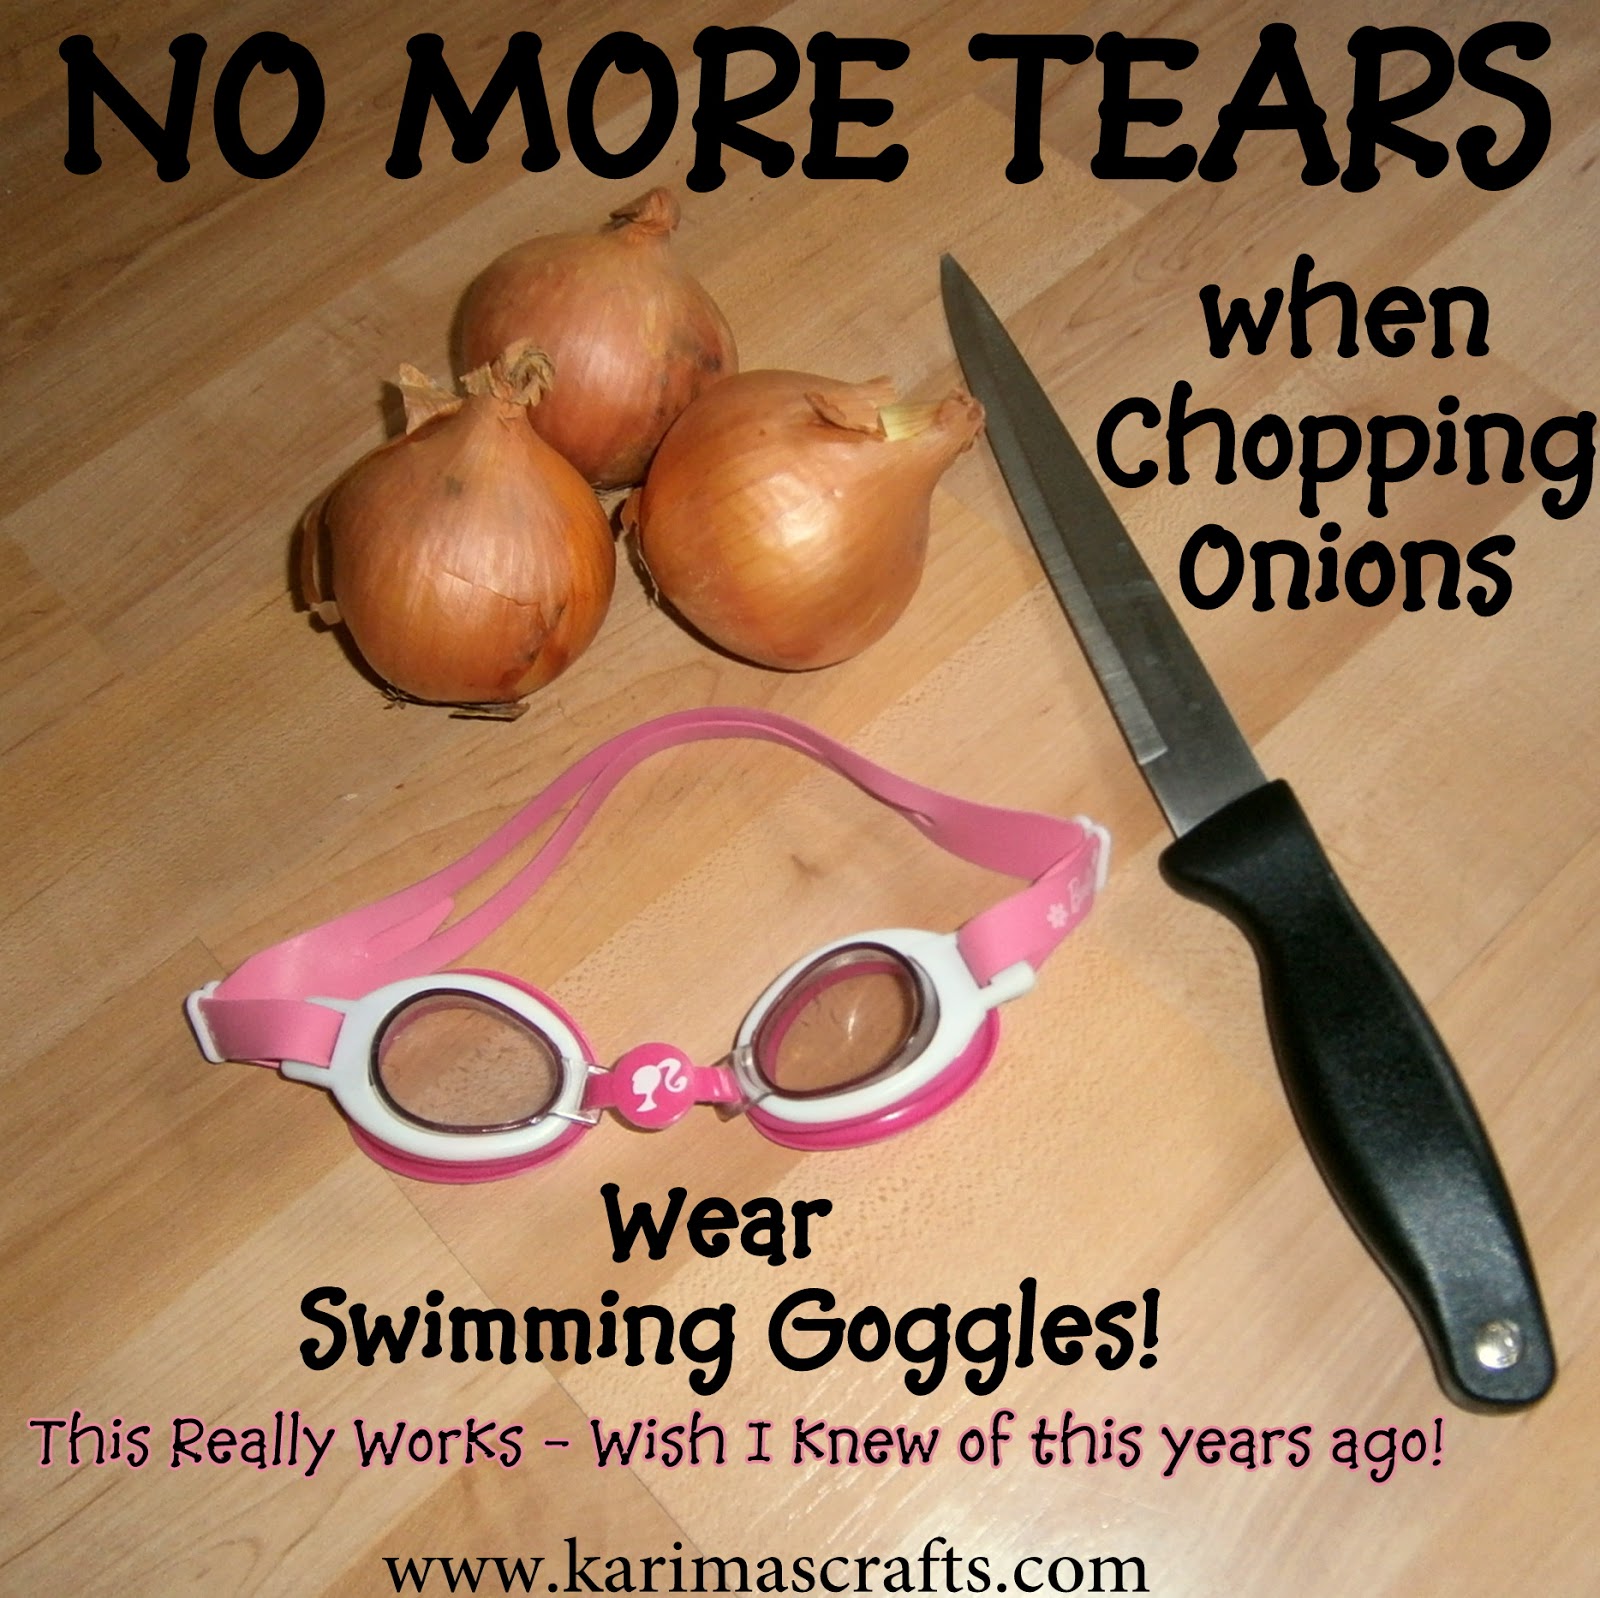 How To Cut Onions without crying - Goggles